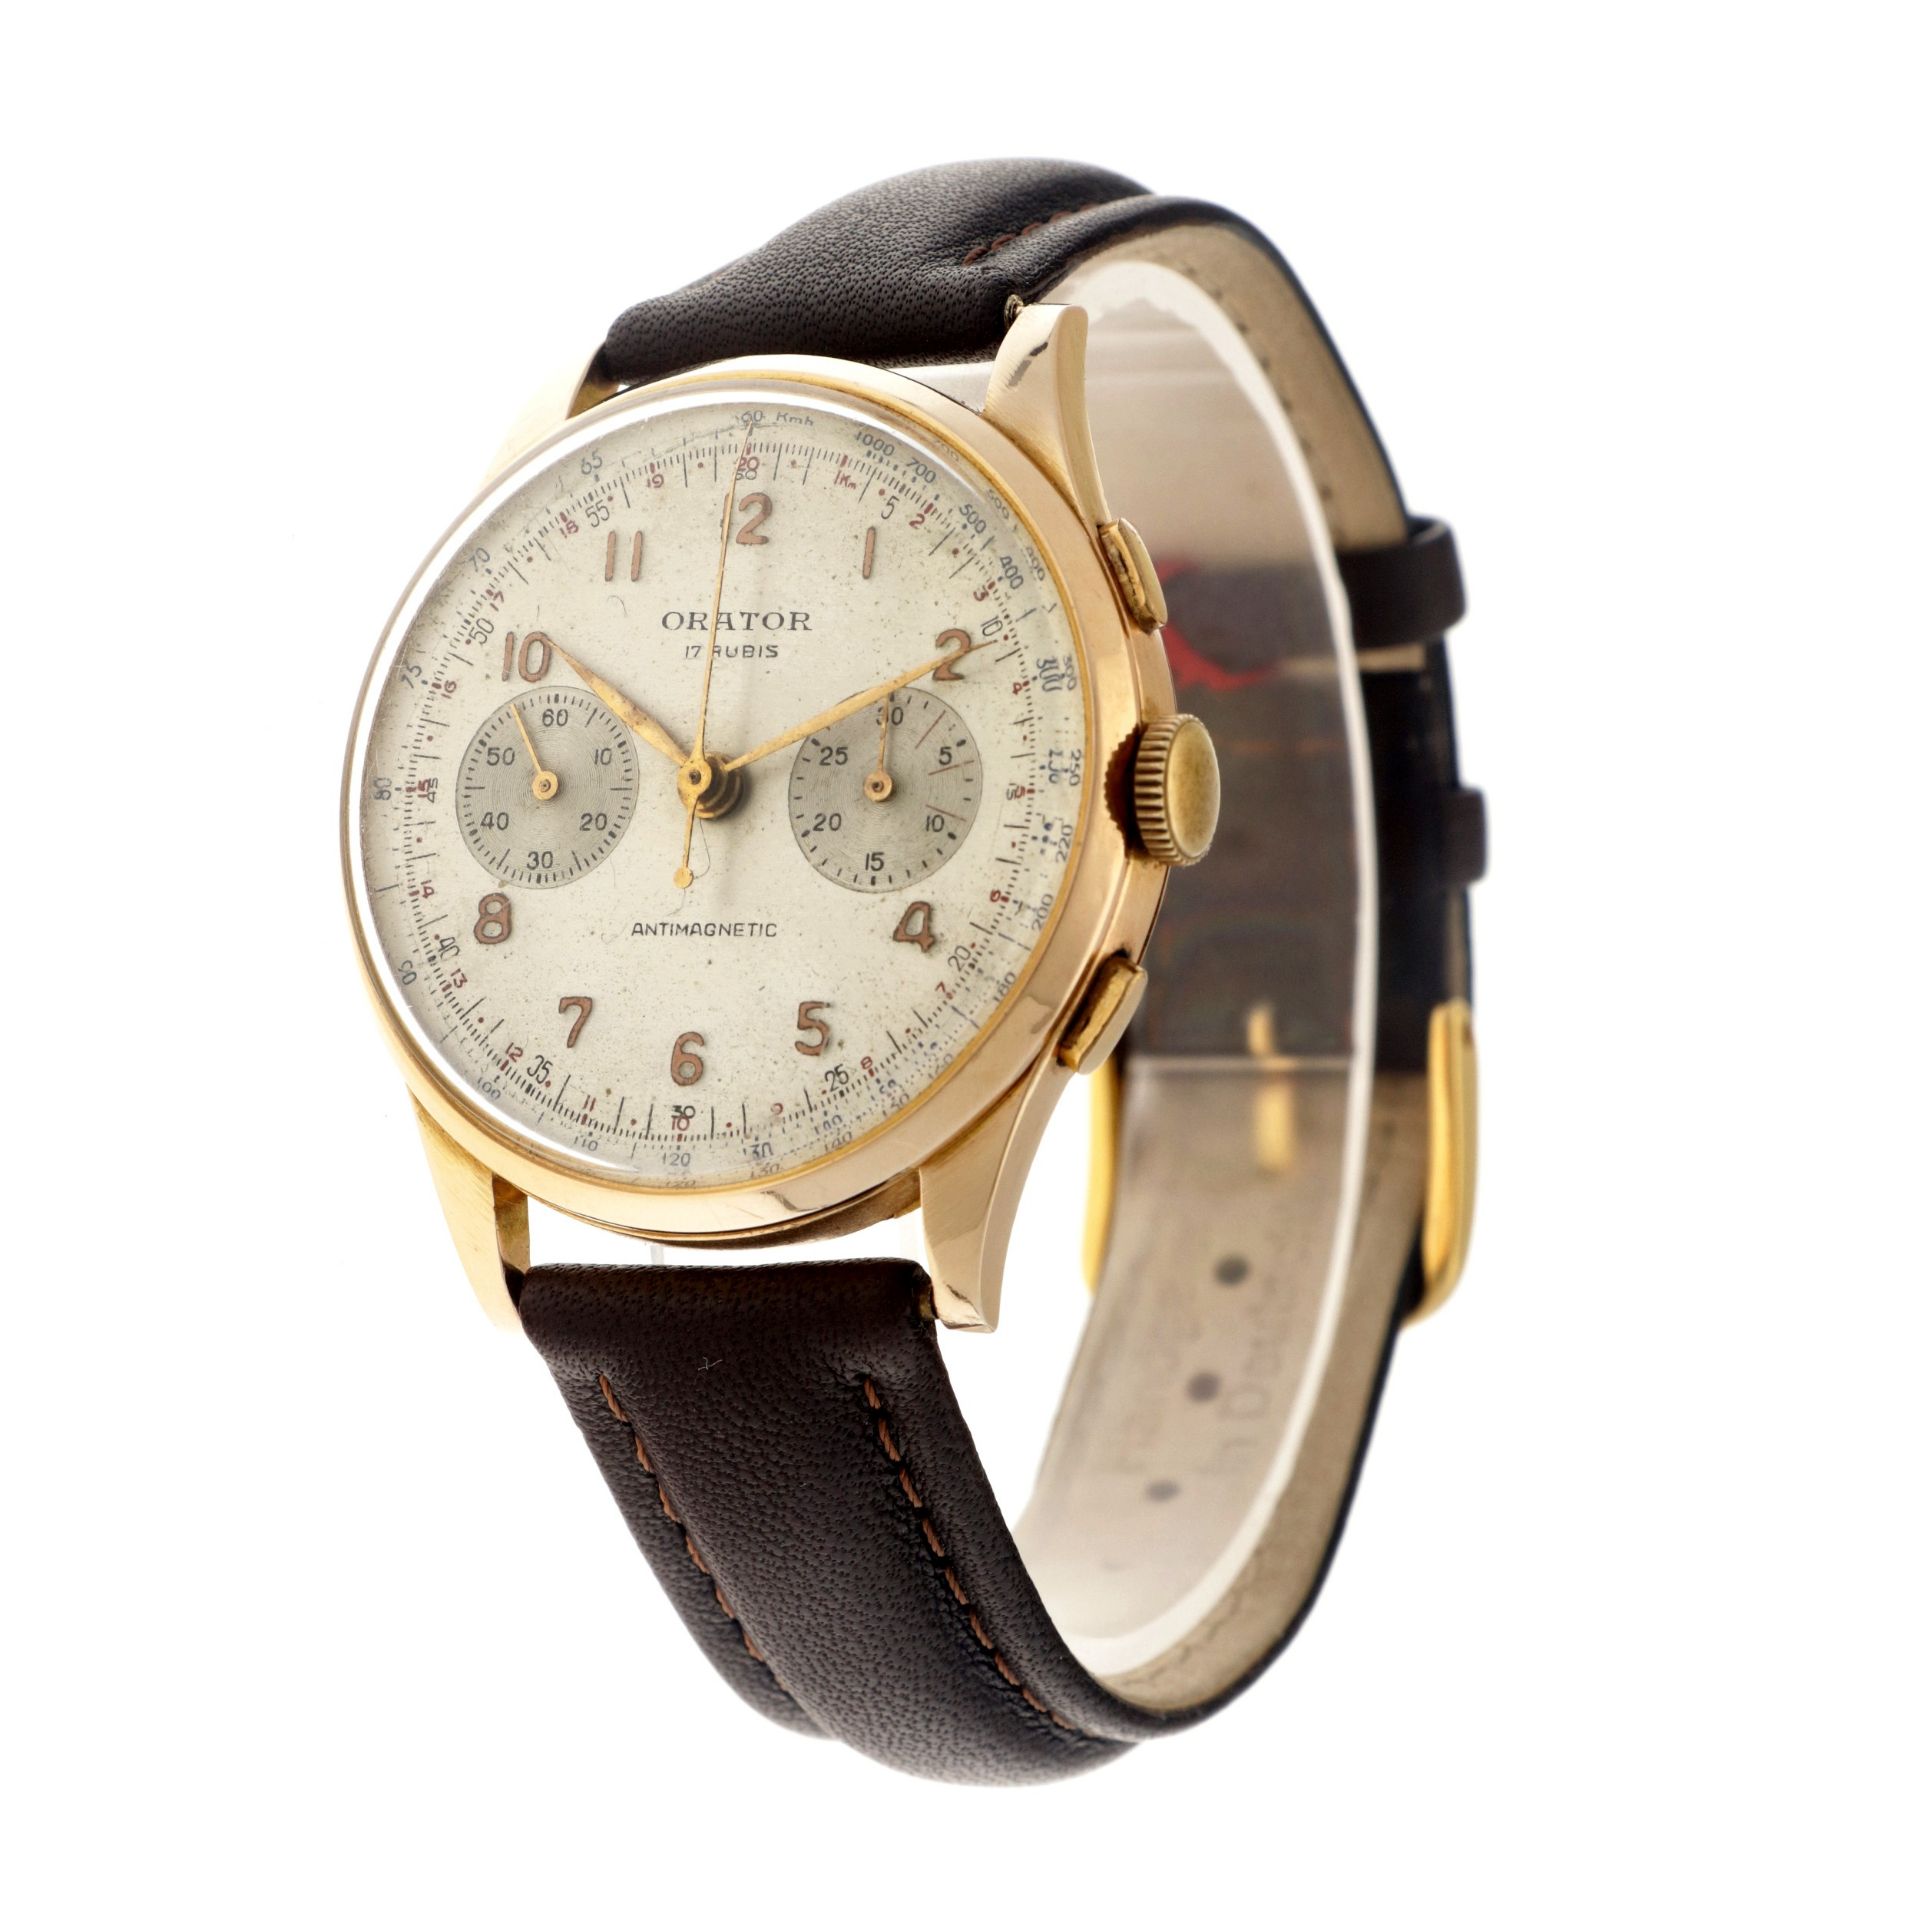 No Reserve - Orator Chronograph Suisse - Men's watch. - Image 2 of 7